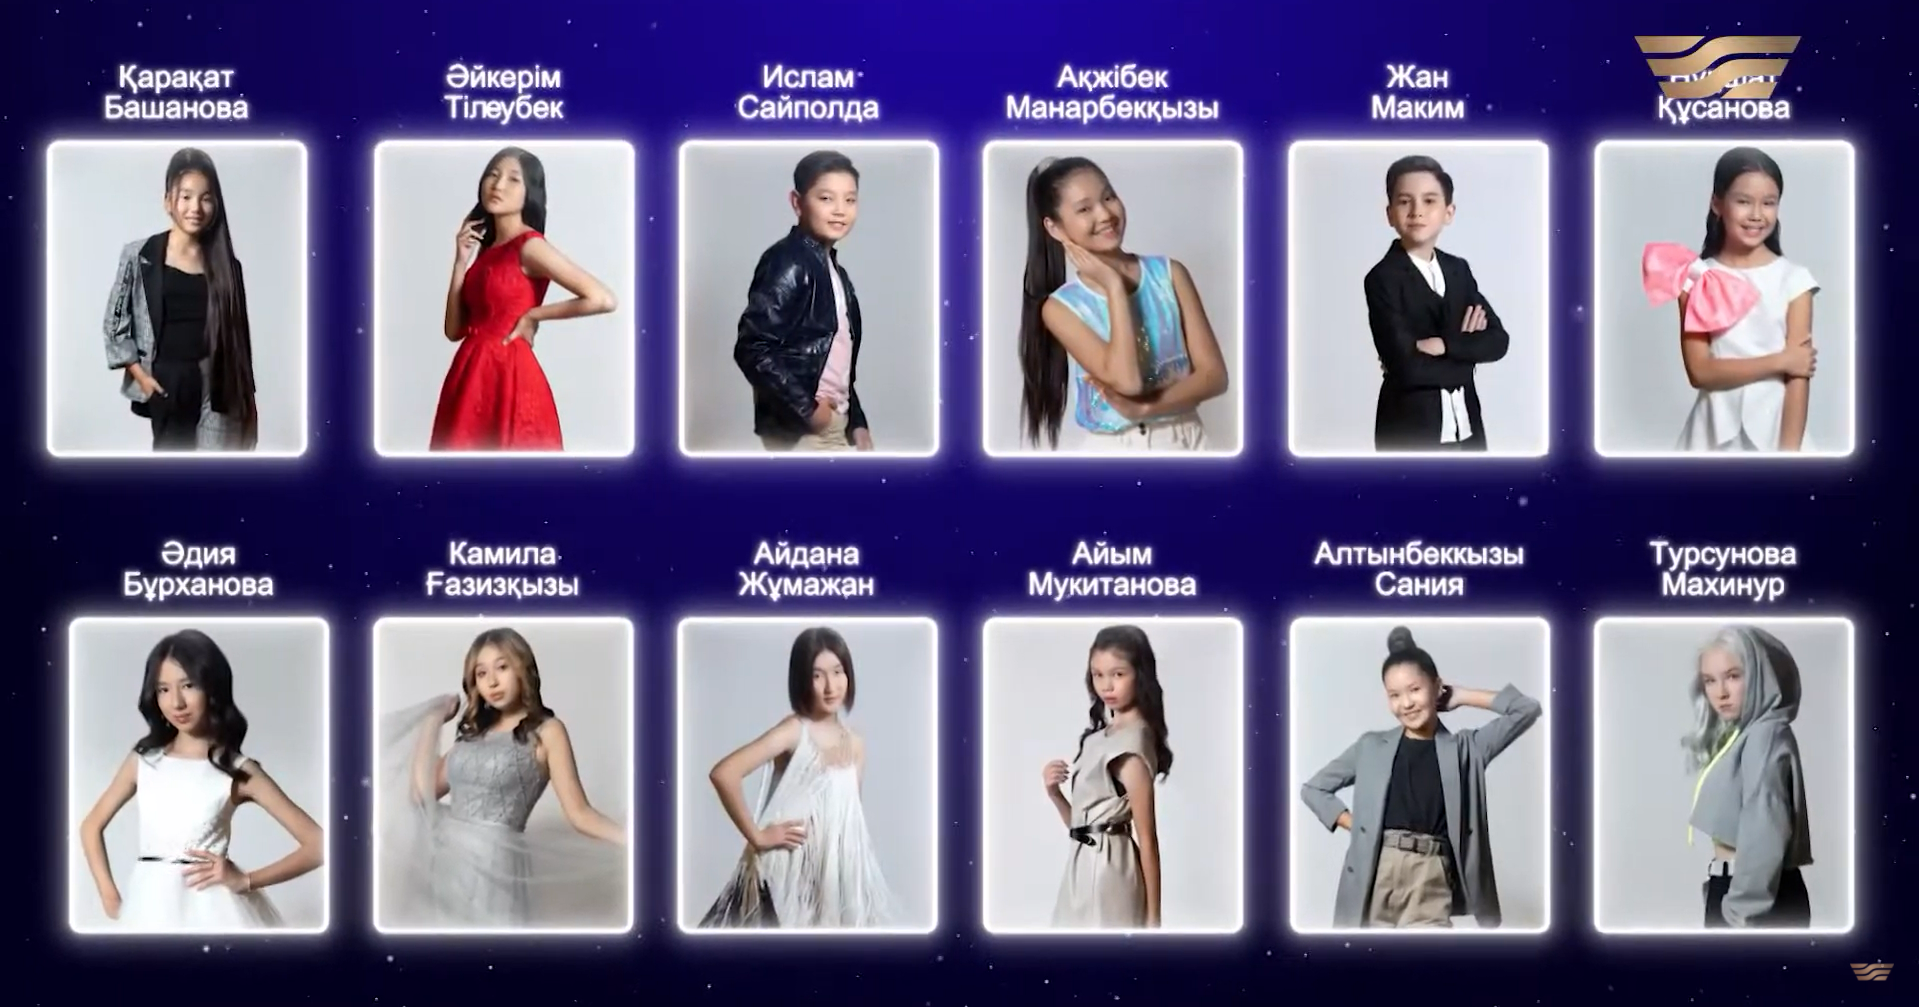 Today: Kazakhstan selects for Junior Eurovision 2020